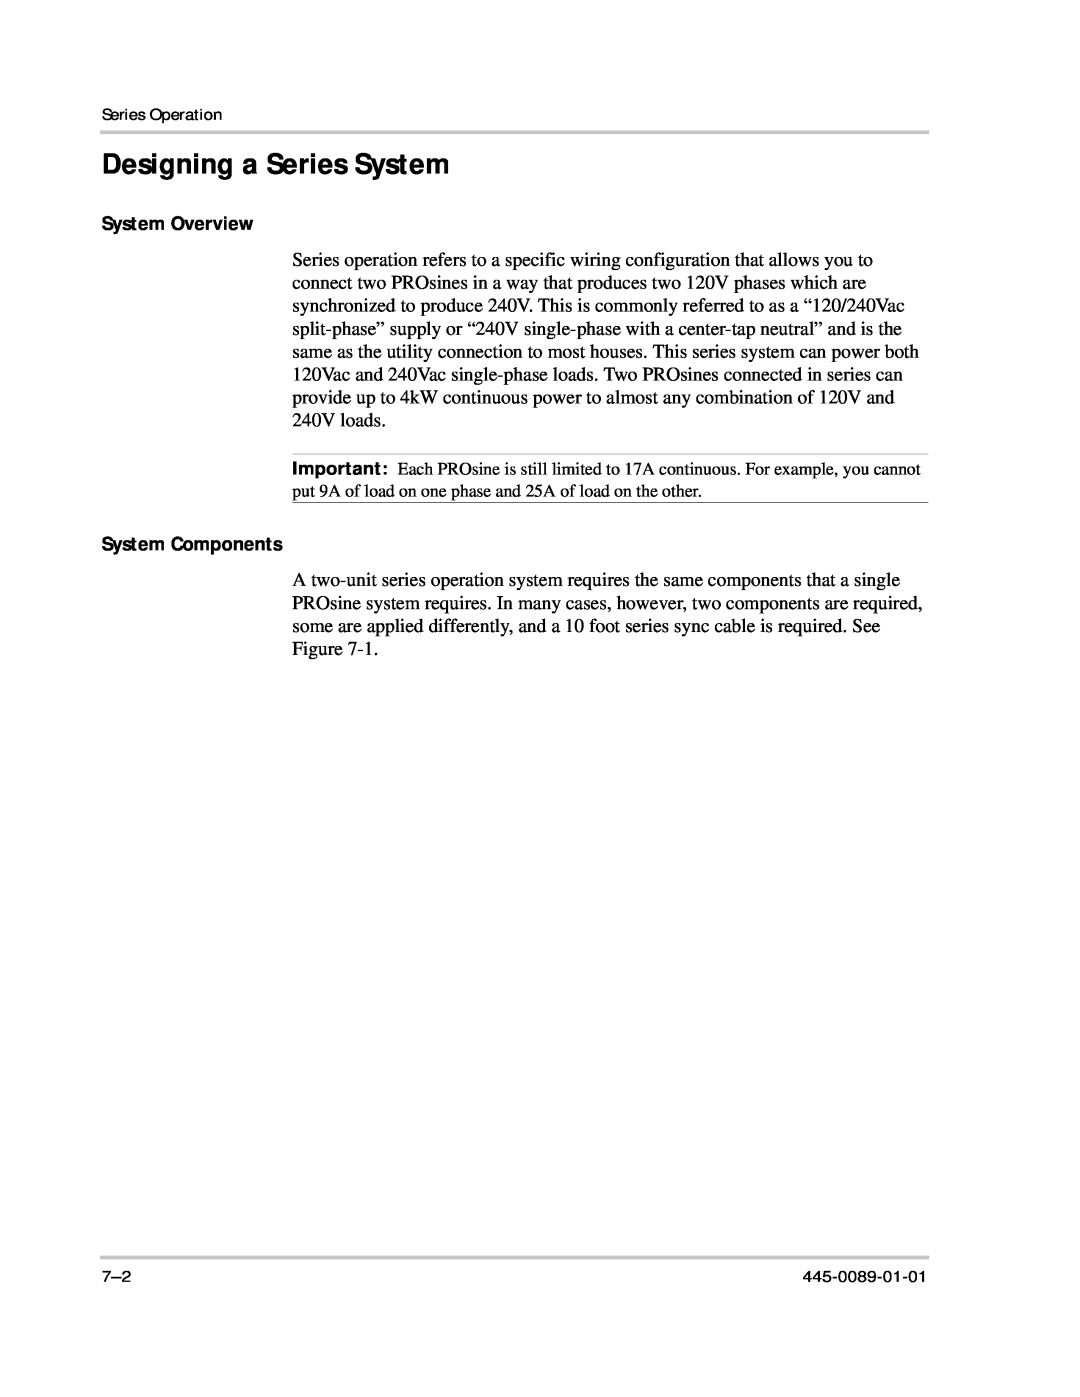 Xantrex Technology PROsine 2.0 user manual Designing a Series System, System Overview, System Components 